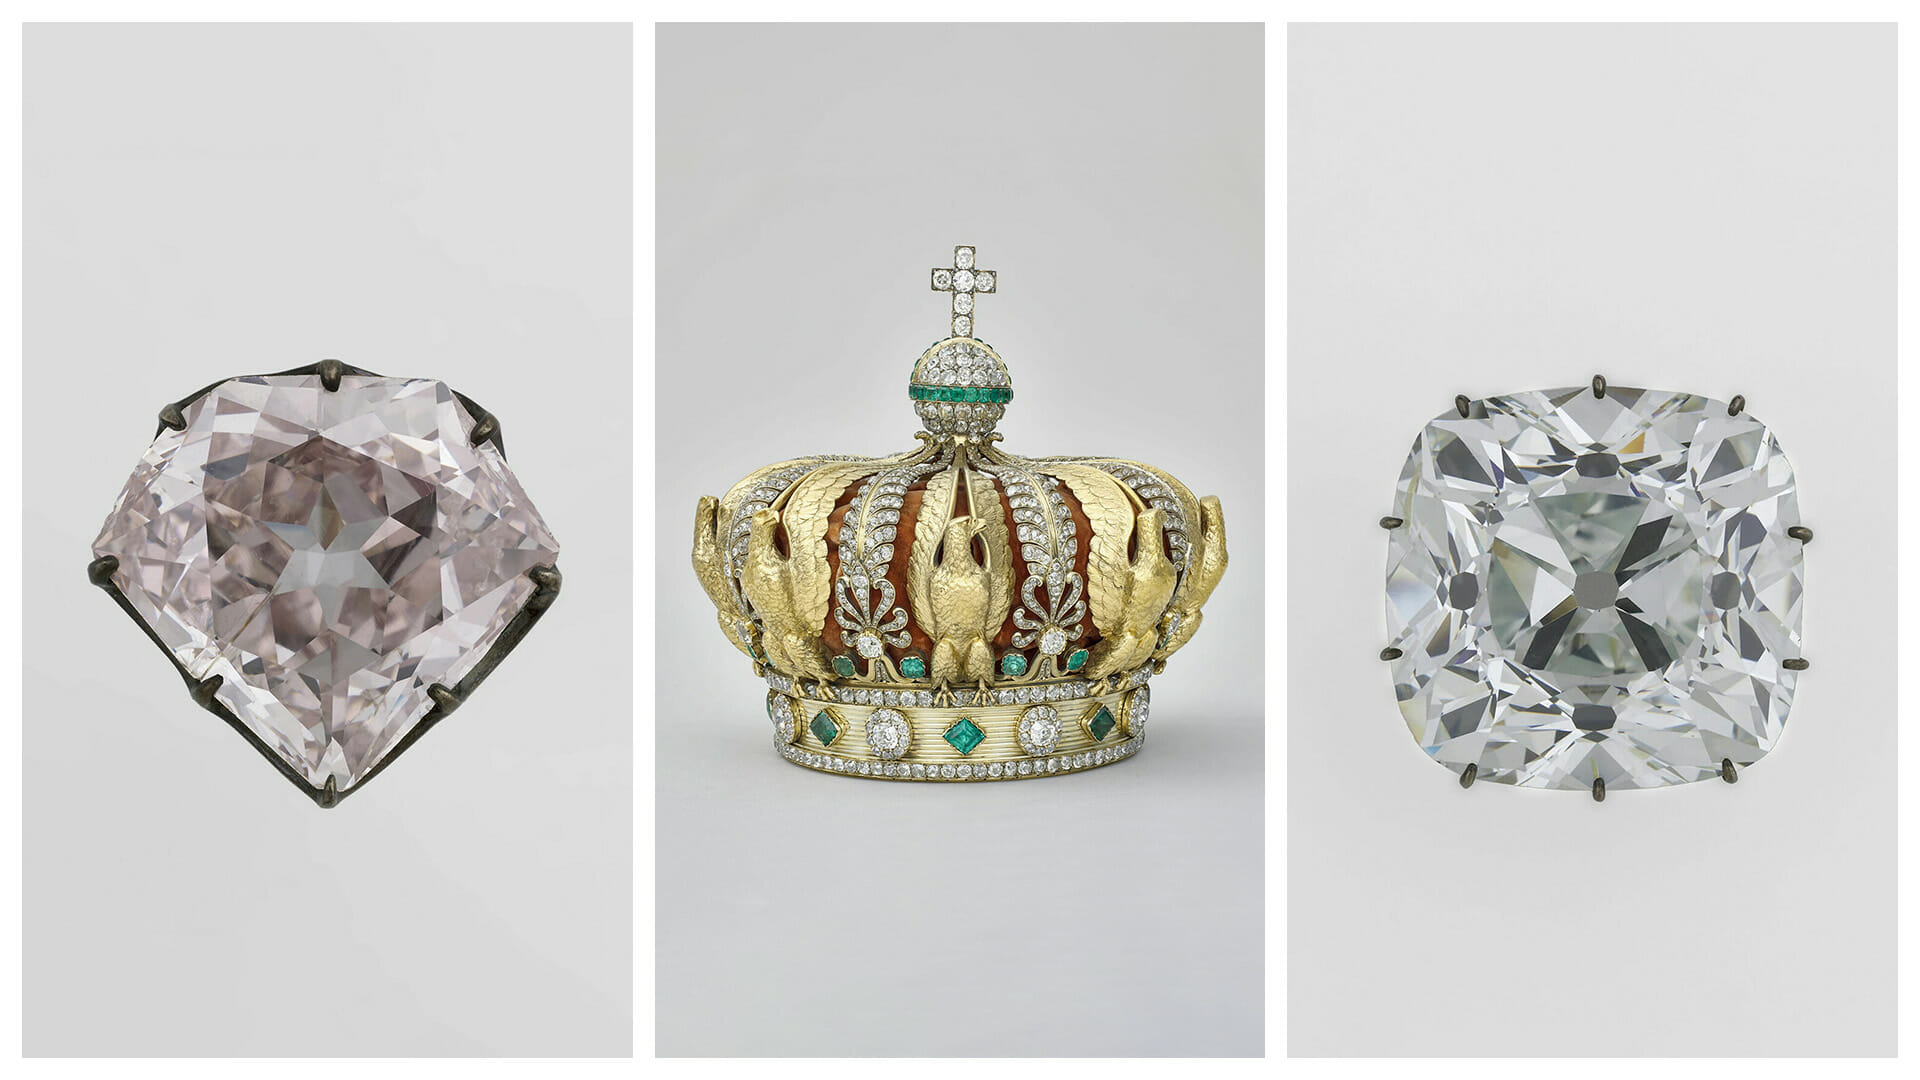 The Lost Royal Jewels of Marie Antoinette –